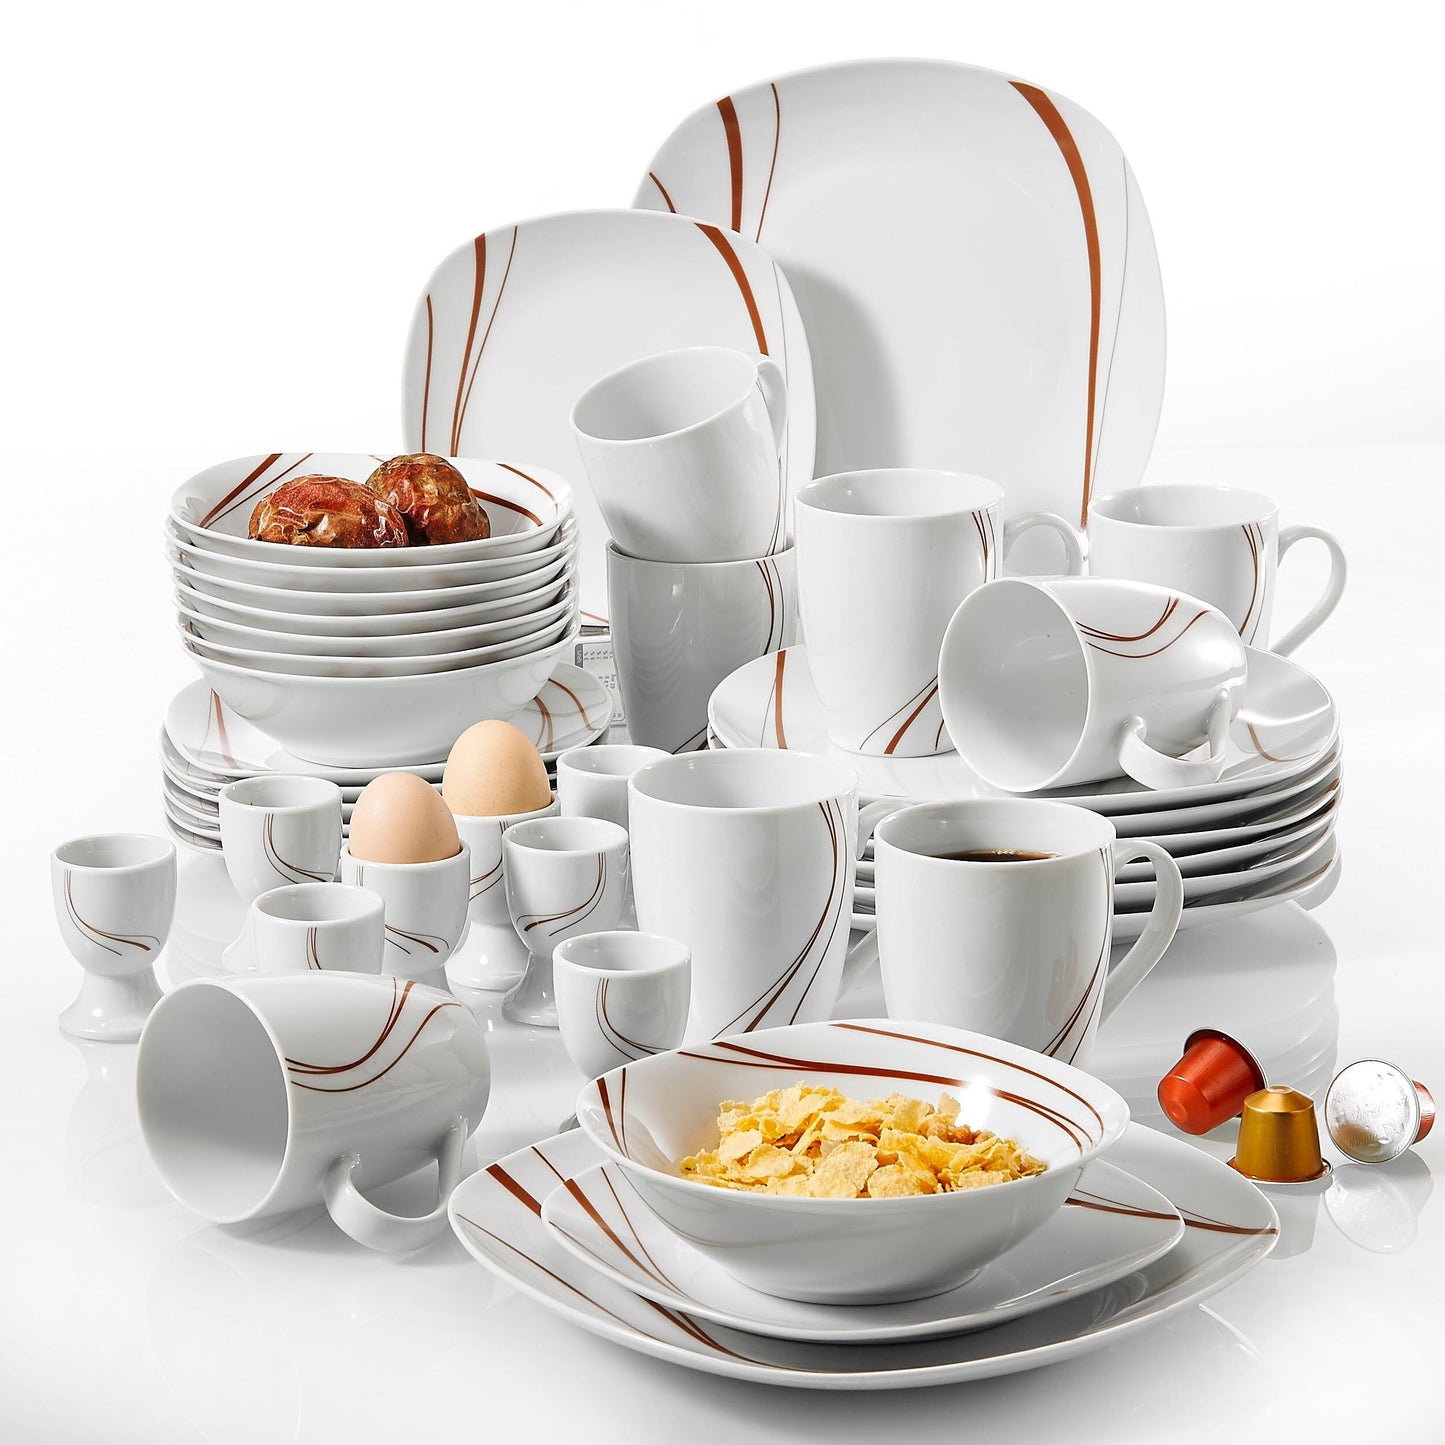 BONNIE 40-Piece Ivory White Tableware Porcelain Cutlery Dinner Set with 4*Egg Cup,Mug,Dessert Plate,Bowl,Dinner Plate - Nordic Side - 40, BONNIE, CupMugDessert, Cutlery, Dinner, Egg, Ivory, P